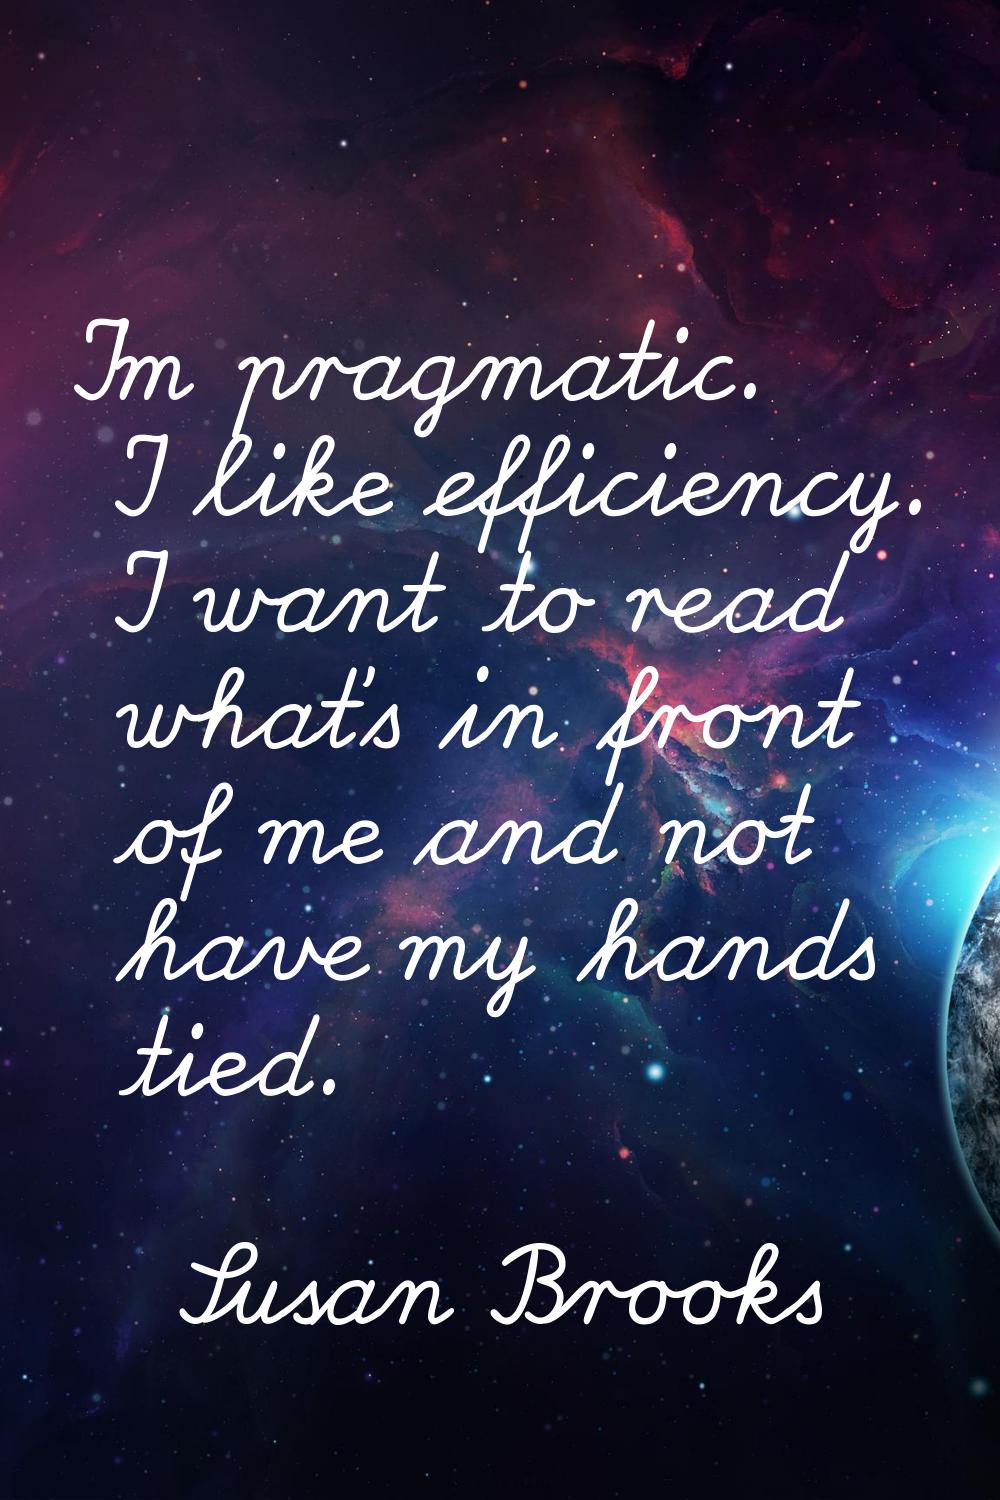 I'm pragmatic. I like efficiency. I want to read what's in front of me and not have my hands tied.